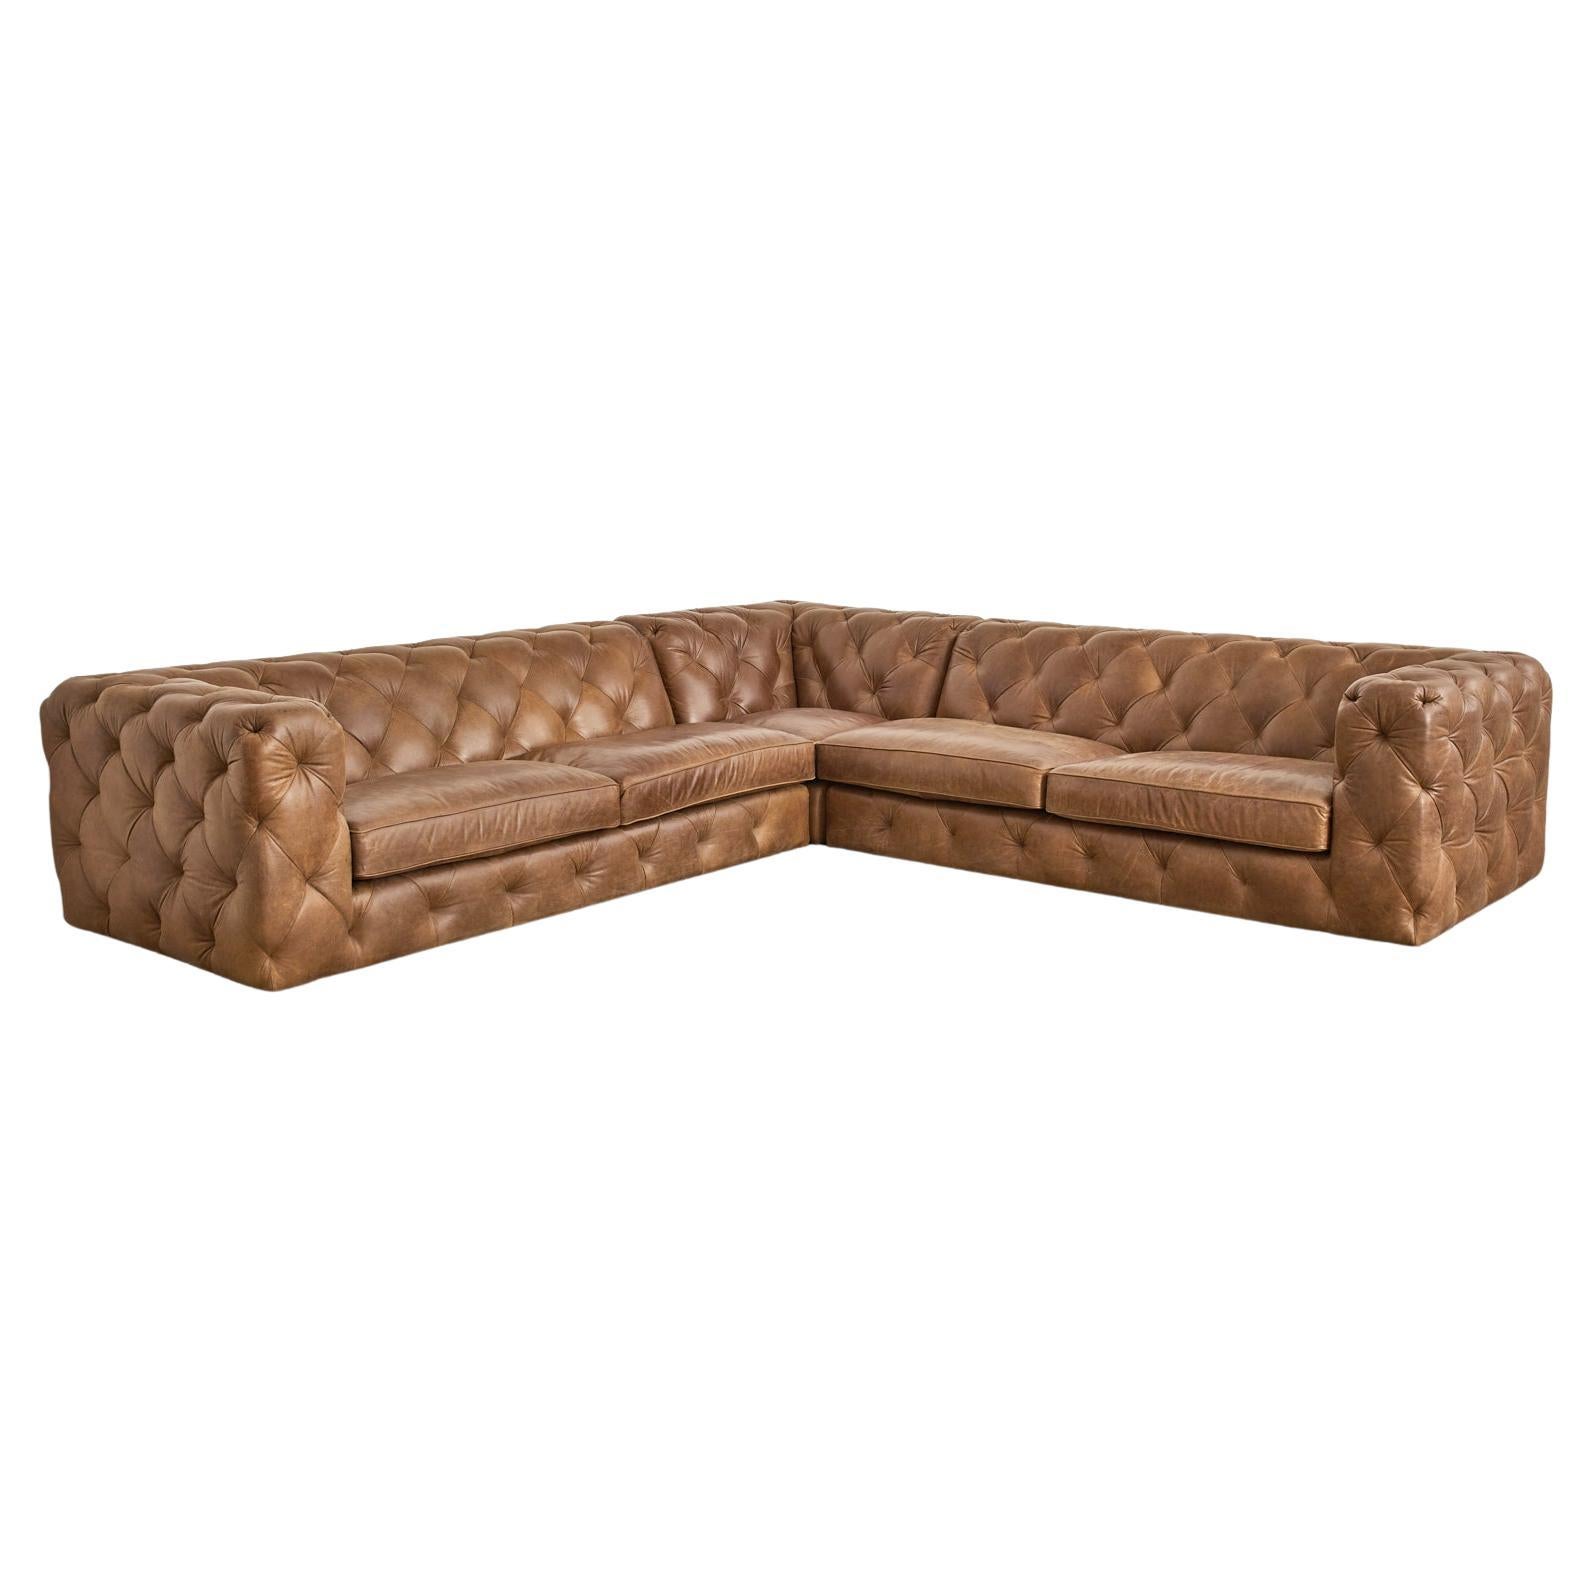 Neiman-Marcus Three Piece Tufted Leather Sectional Sofa